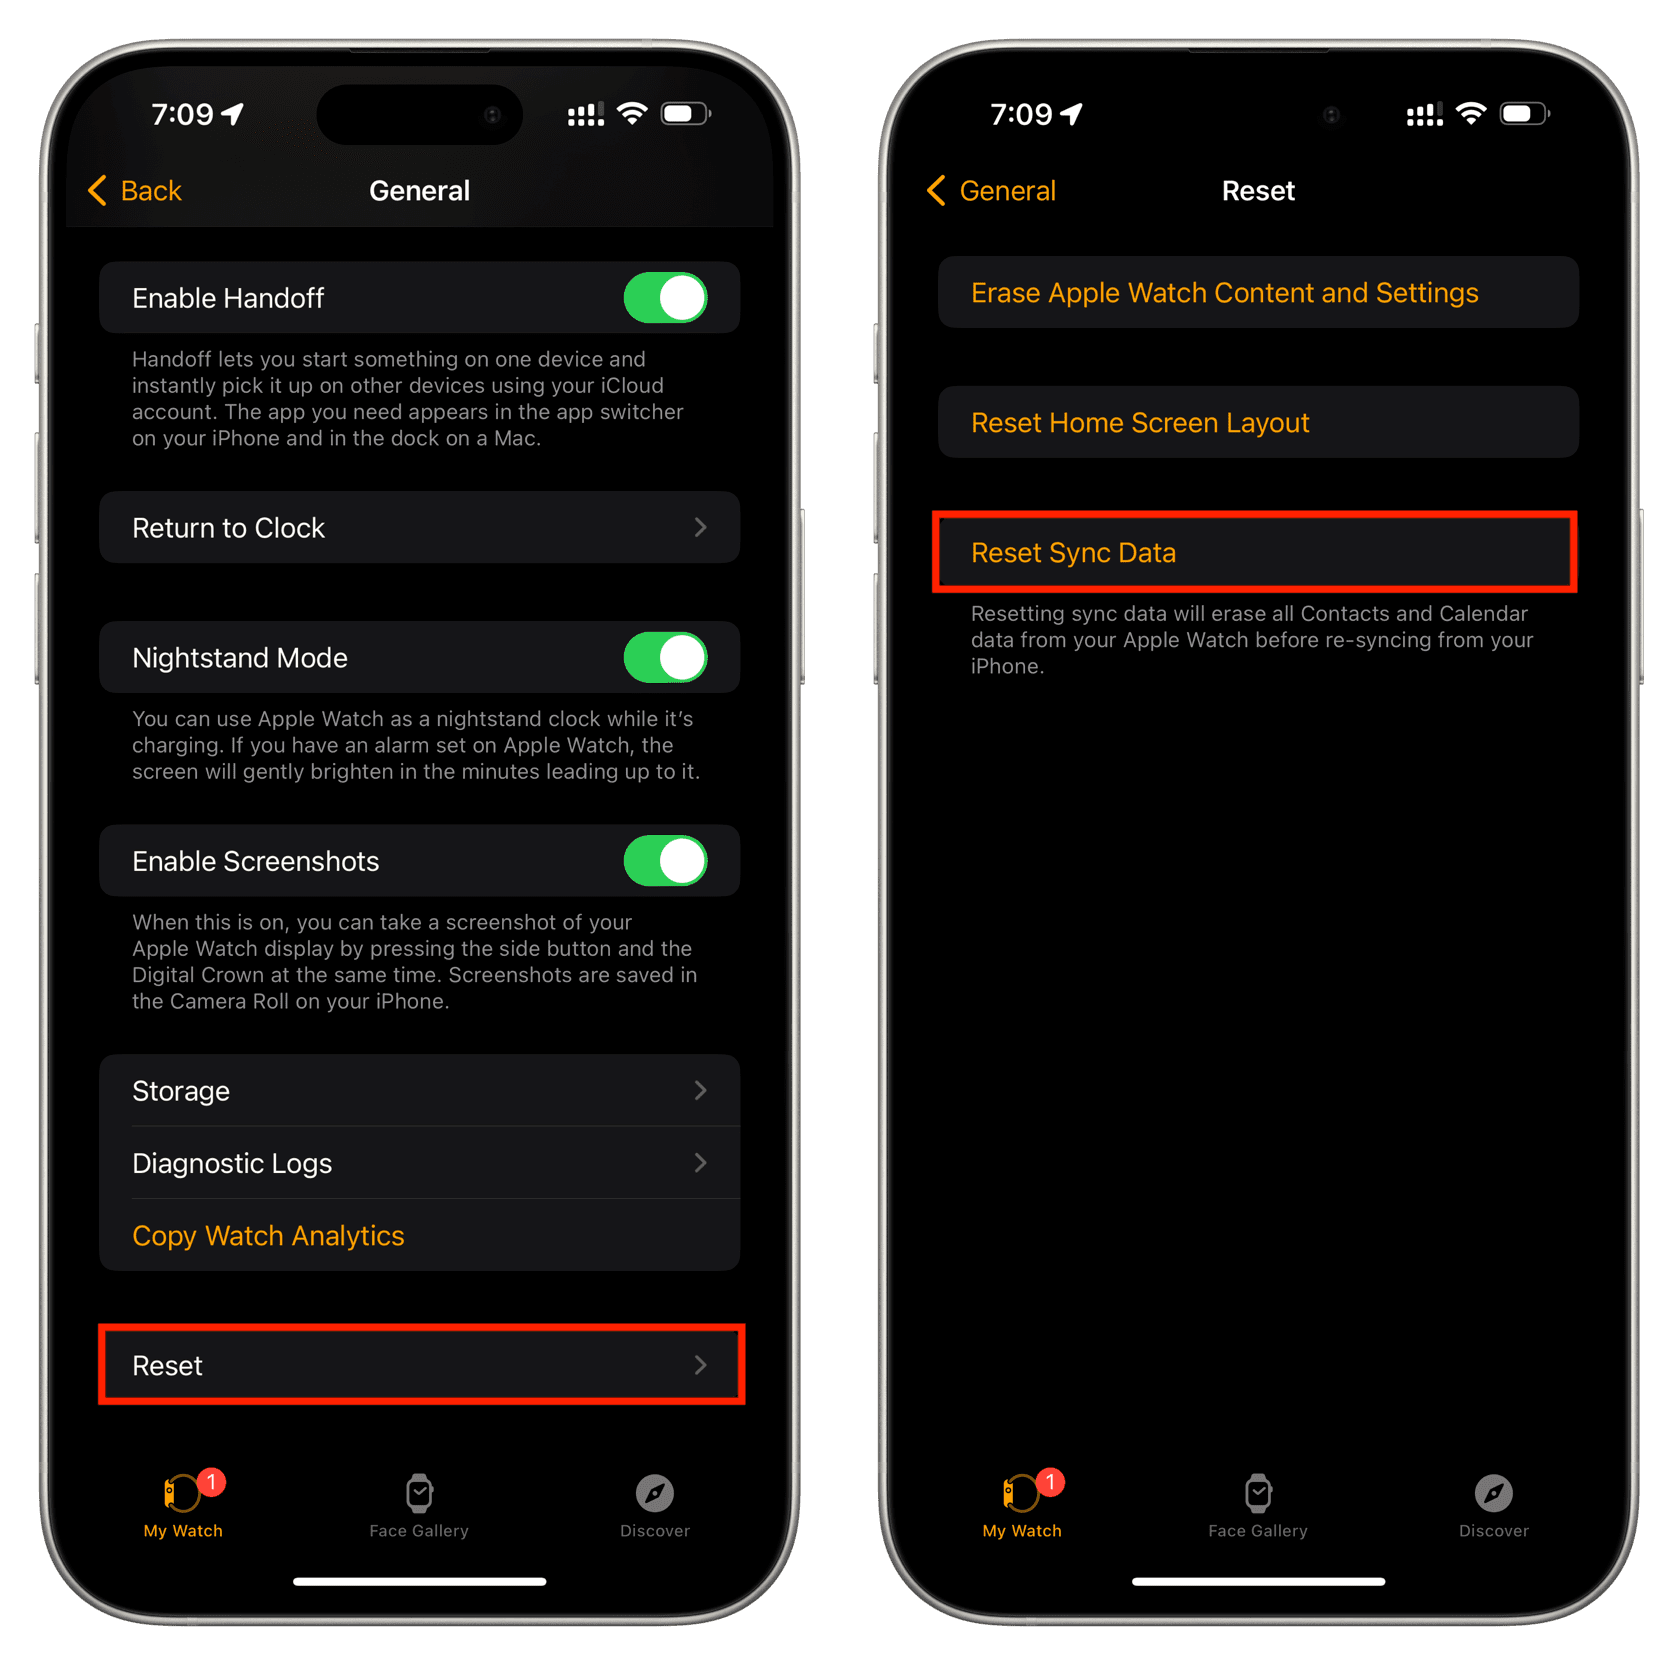 Reset Sync Data option in Apple Watch settings